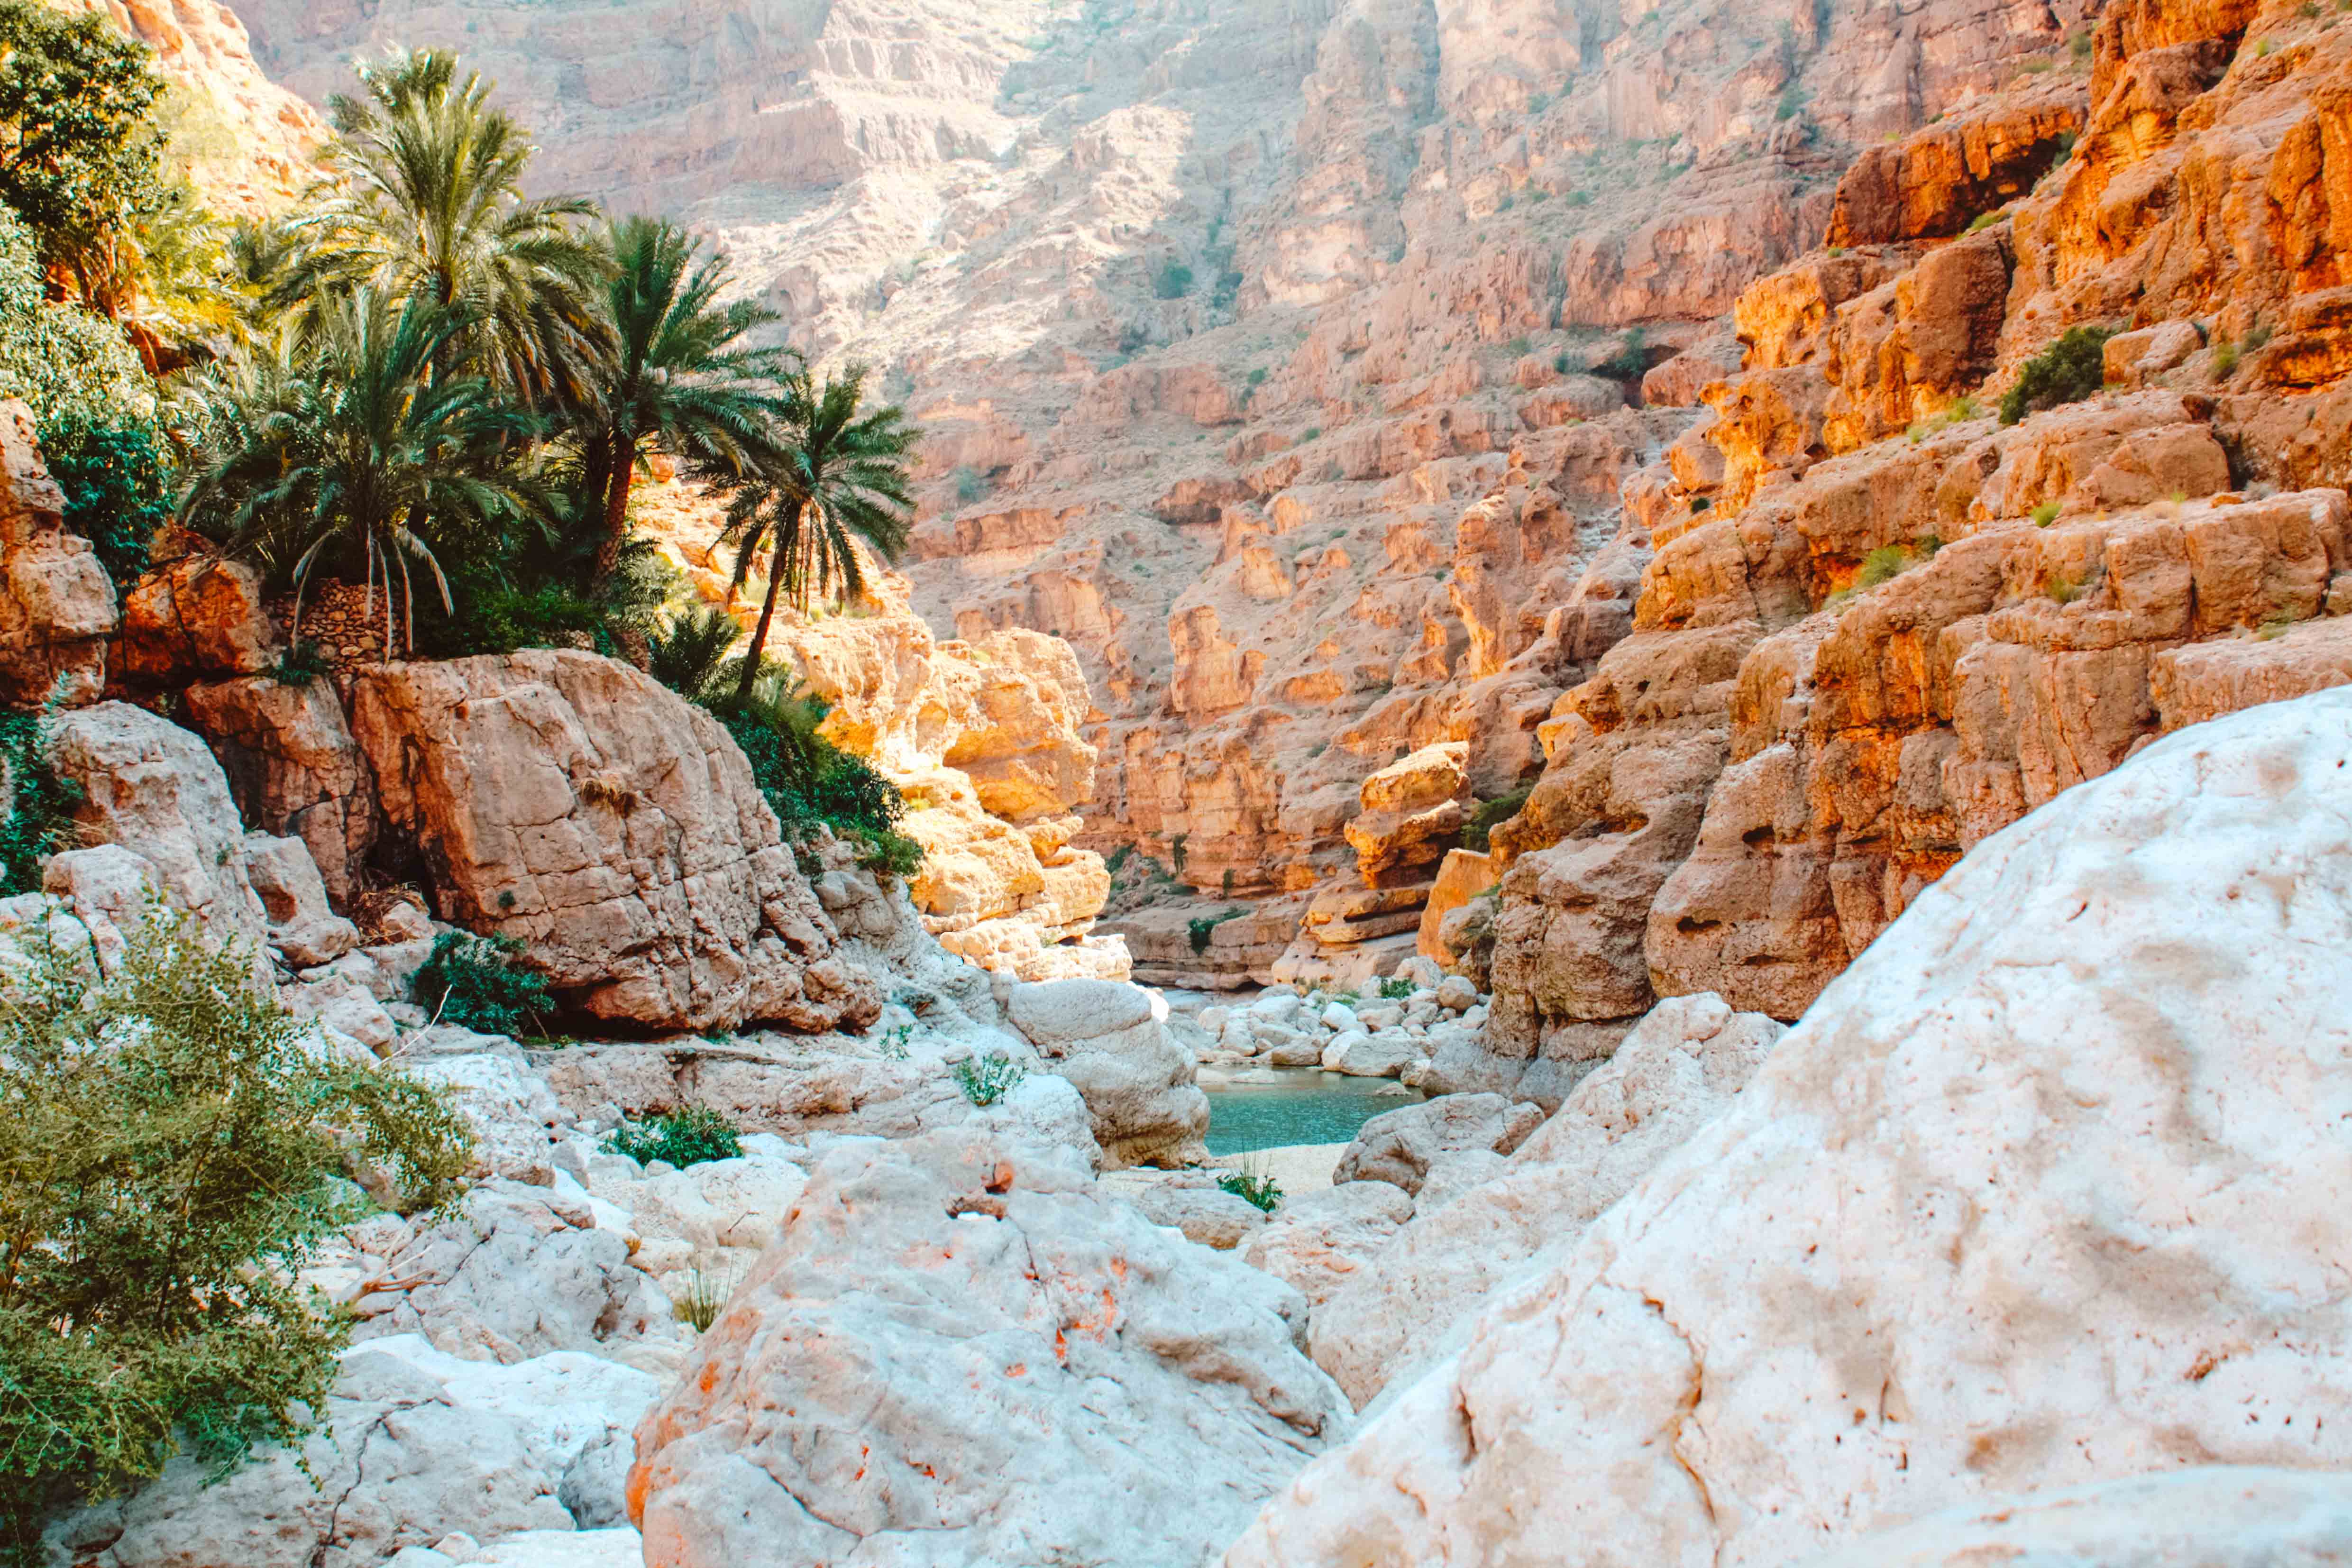 Palm trees above white boulders in the bottom of a wadi bed